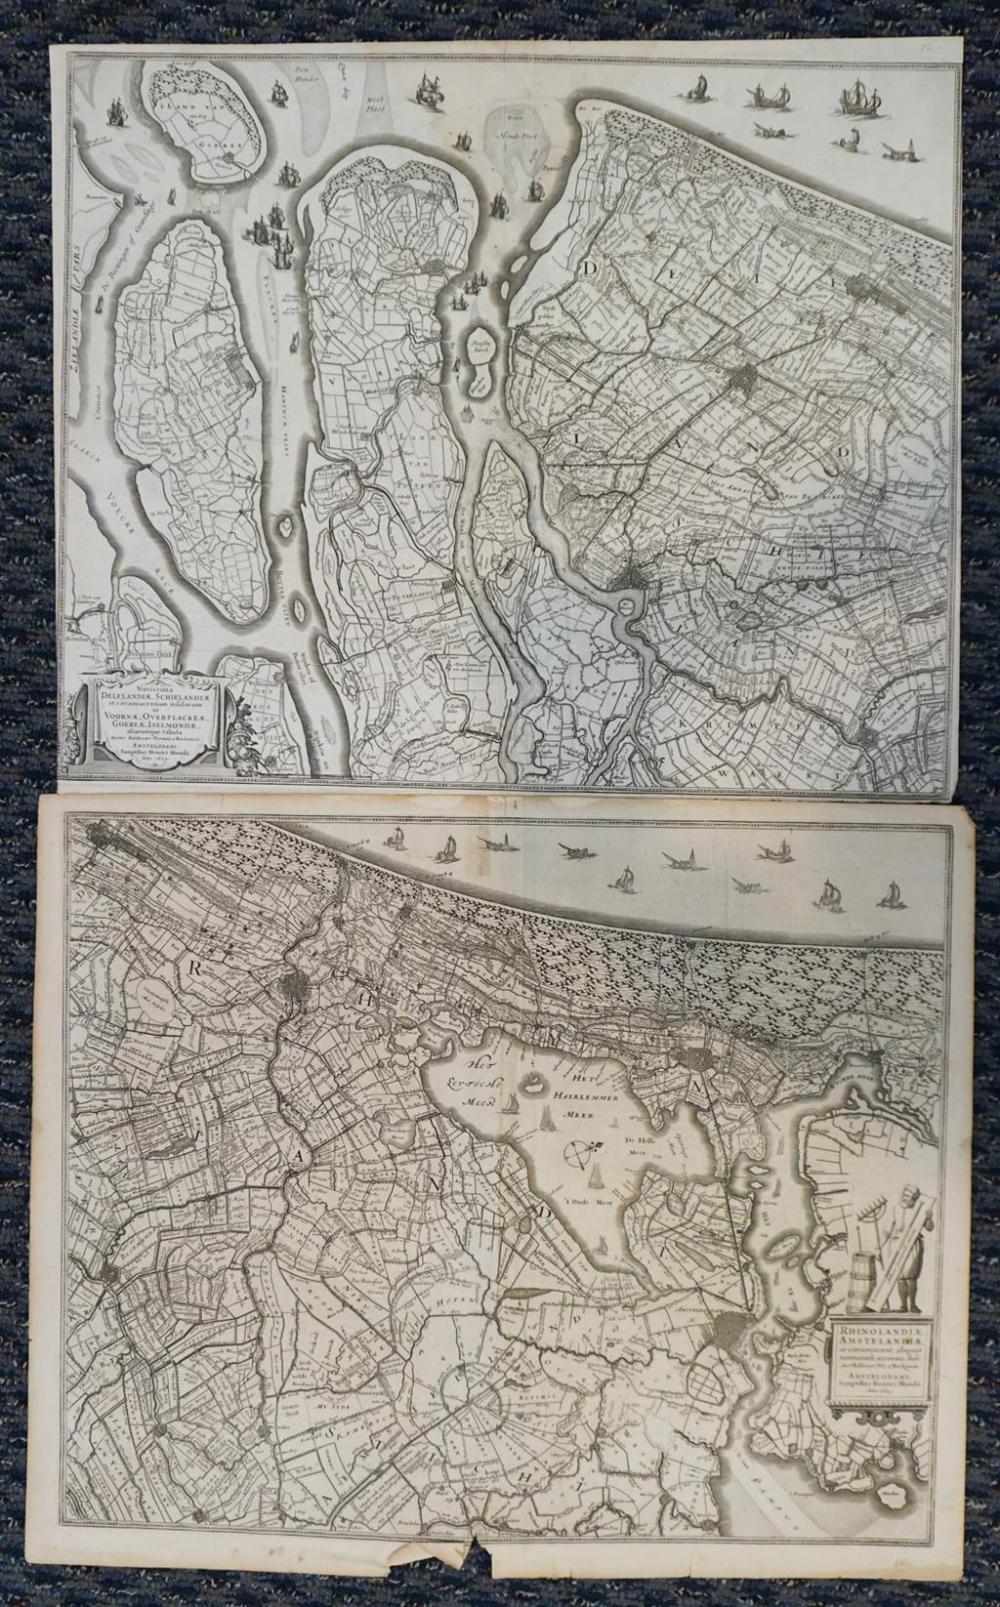 MAPS OF AMSTERDAM AFTER WILLEM 32834b